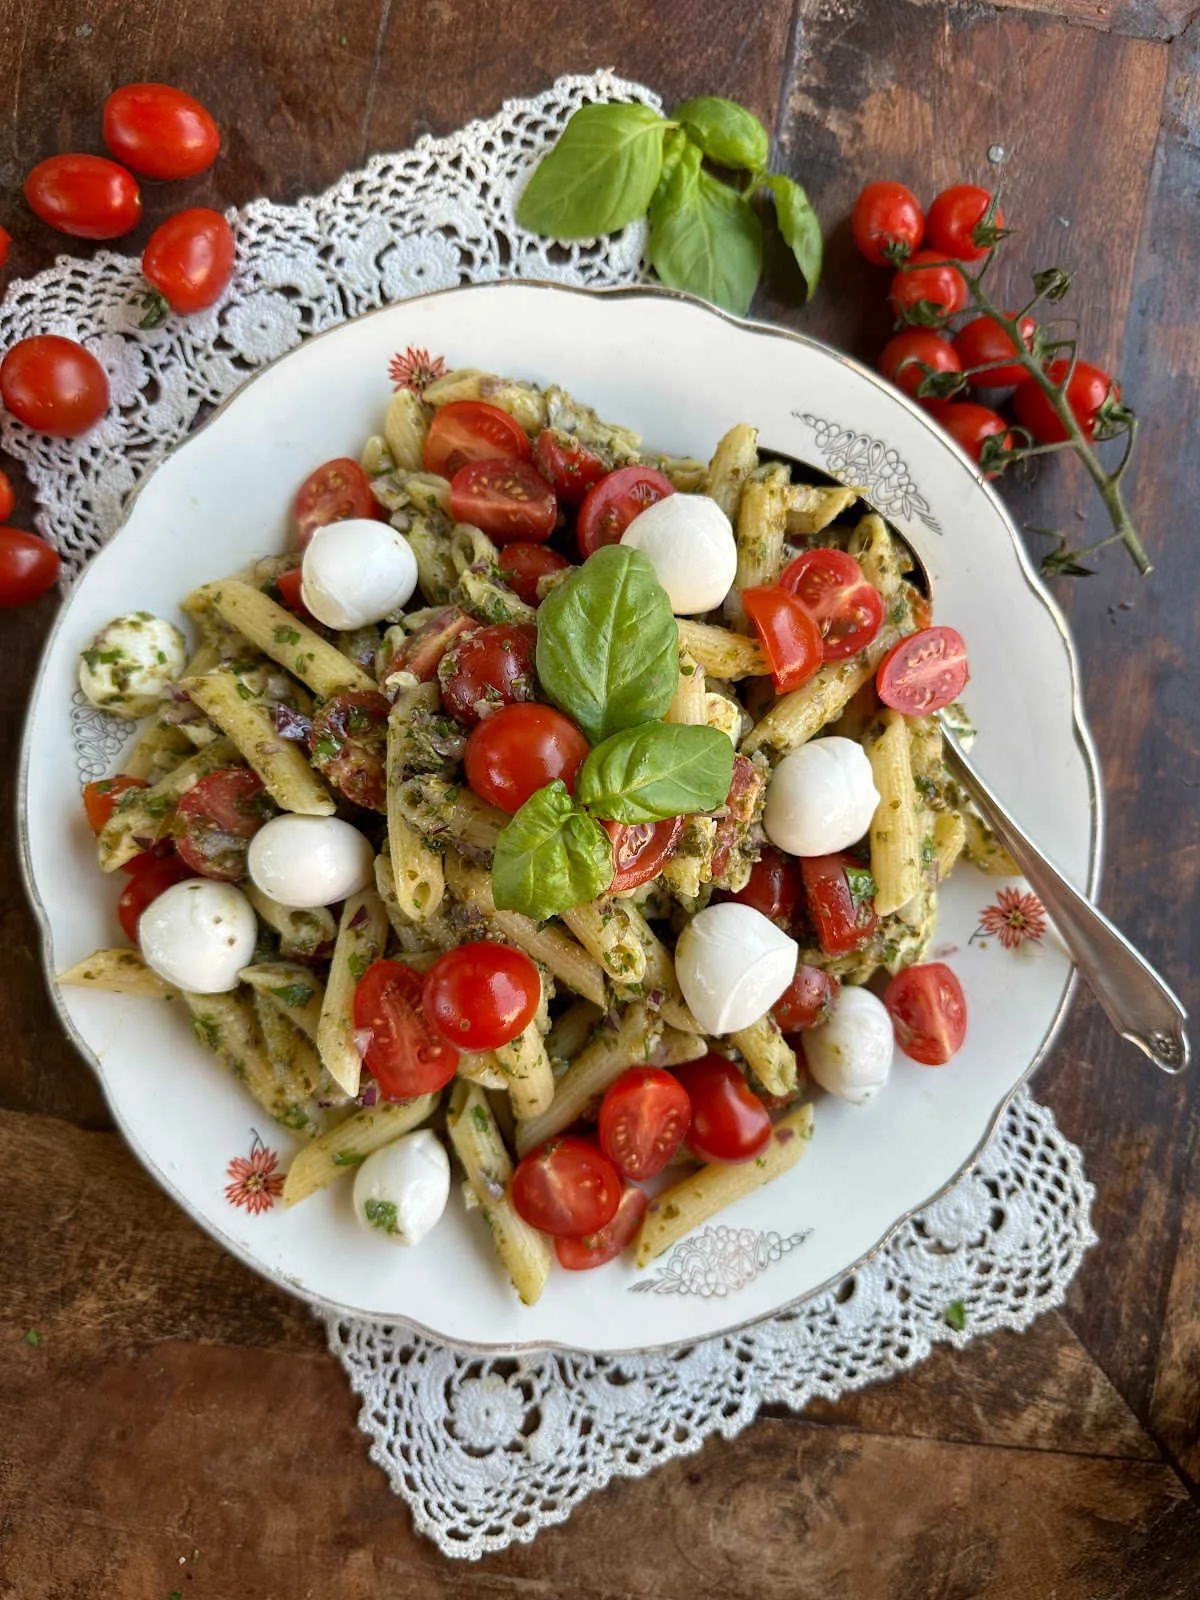 Plate filled with pesto penne salad with cheese, basil, and tomatoes.